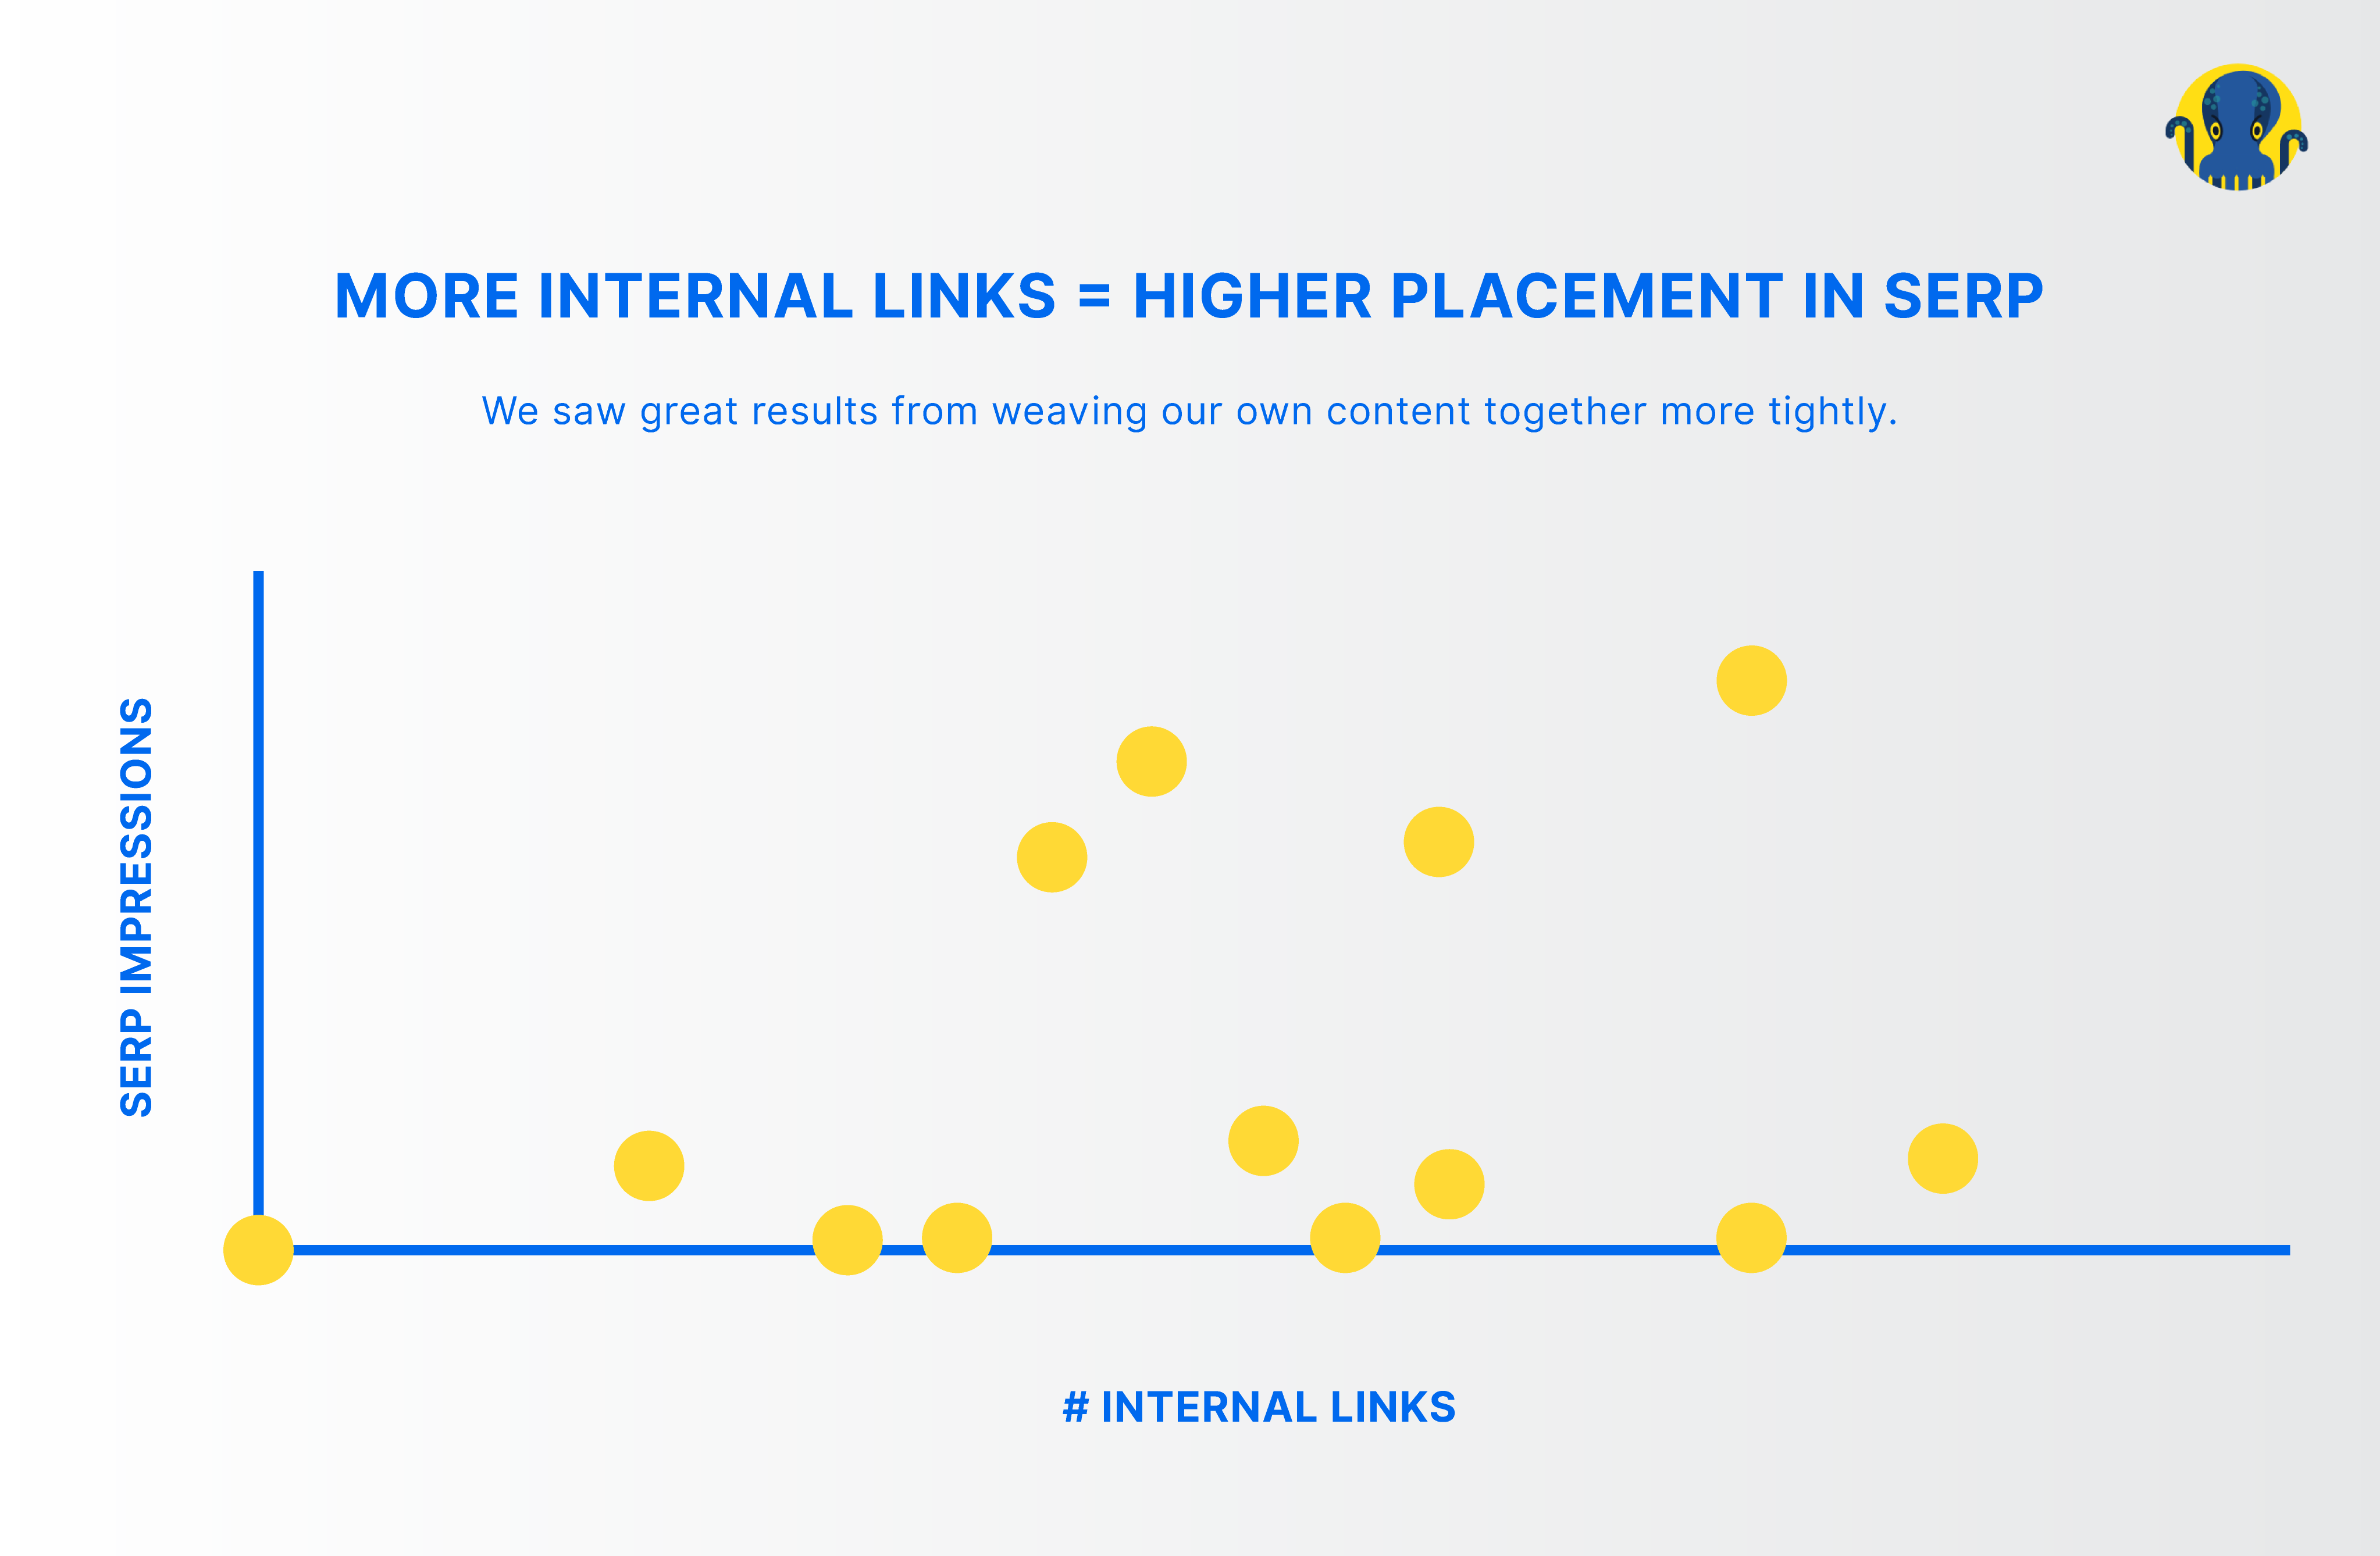 What are Internal Links